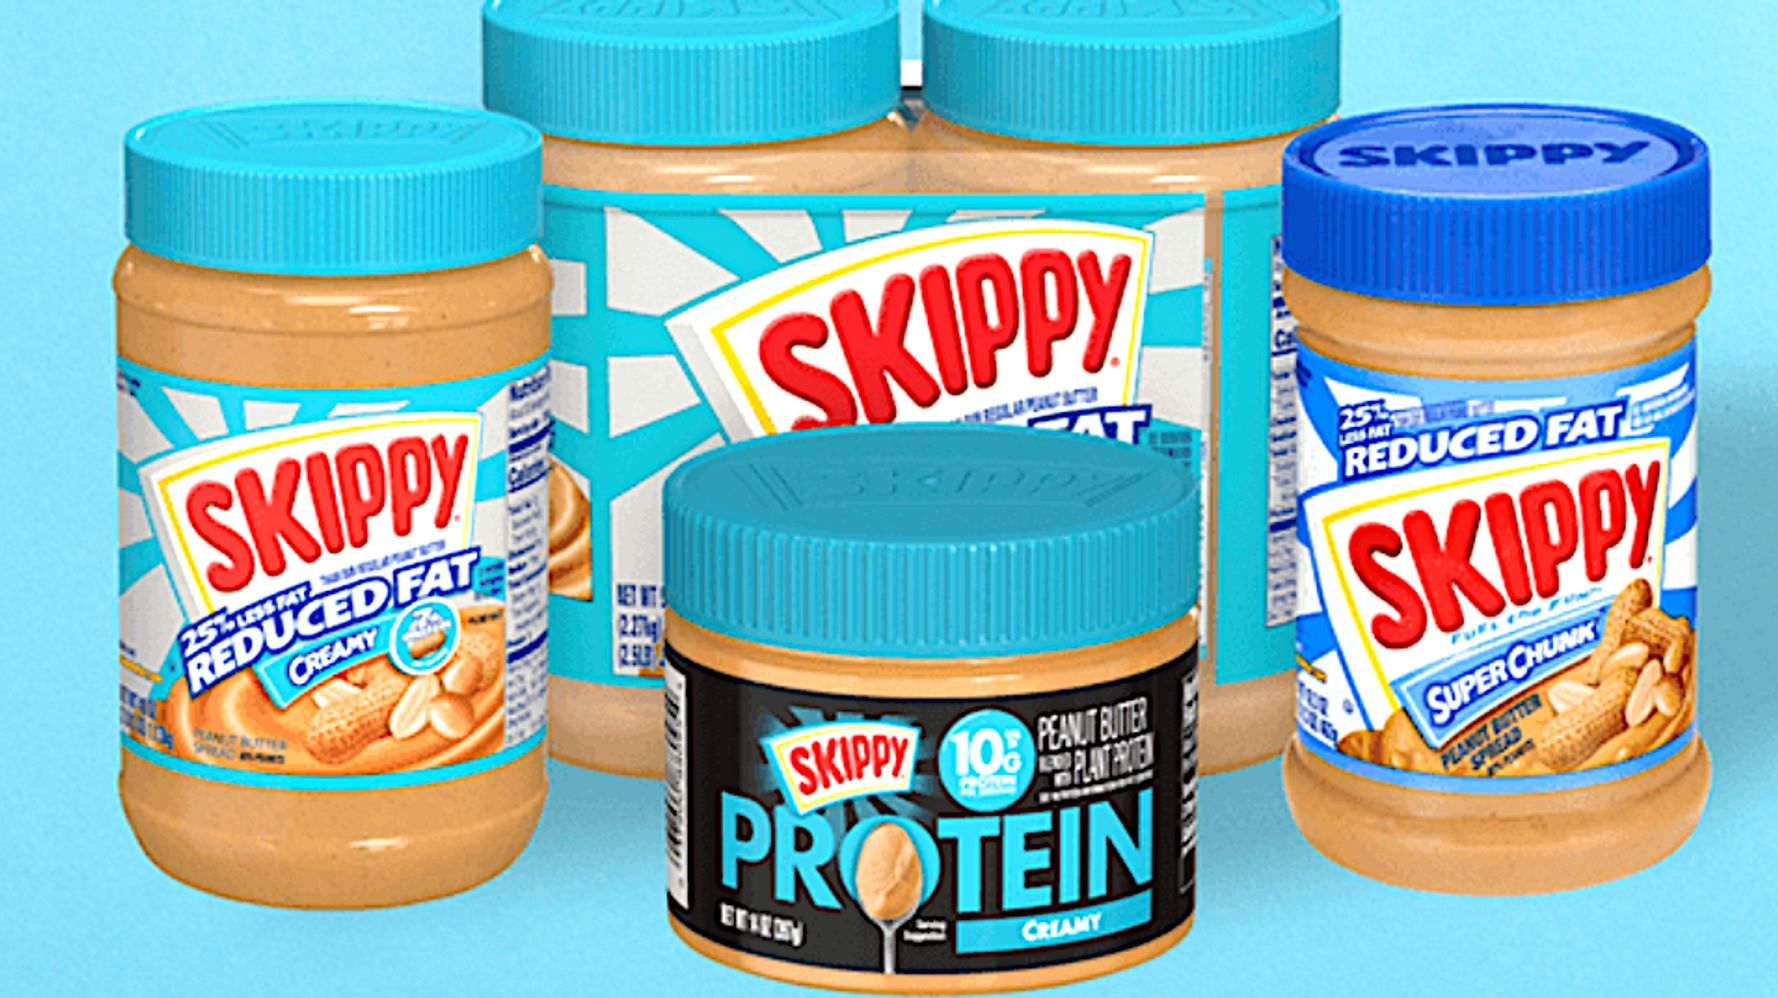 Skippy Is Recalling 162,000 Pounds Of Reduced-Fat Peanut Butter